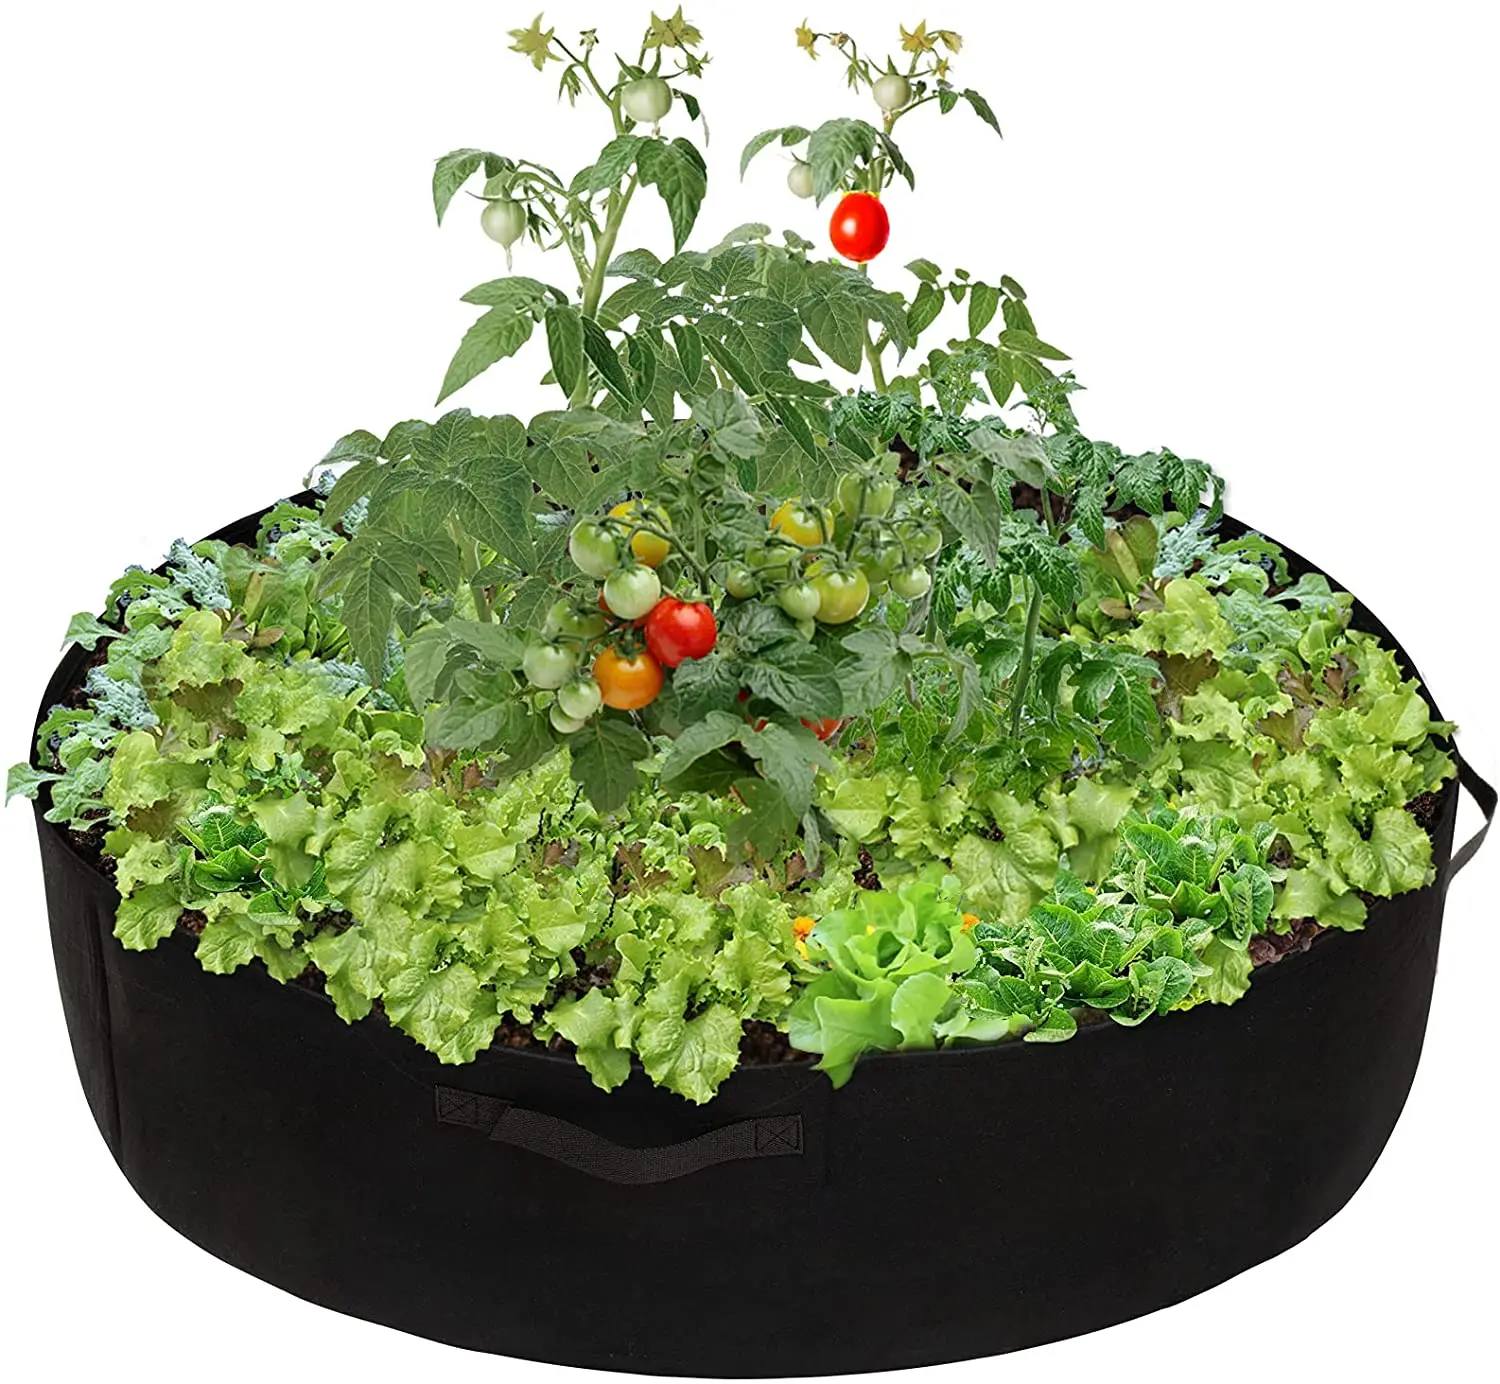 

100 Gallon Round Felt Raised Planting Bed Thicken Non Woven Veggie Grow Bags Fabric Garden Plant Grow pots Bed Planter Container, Customized